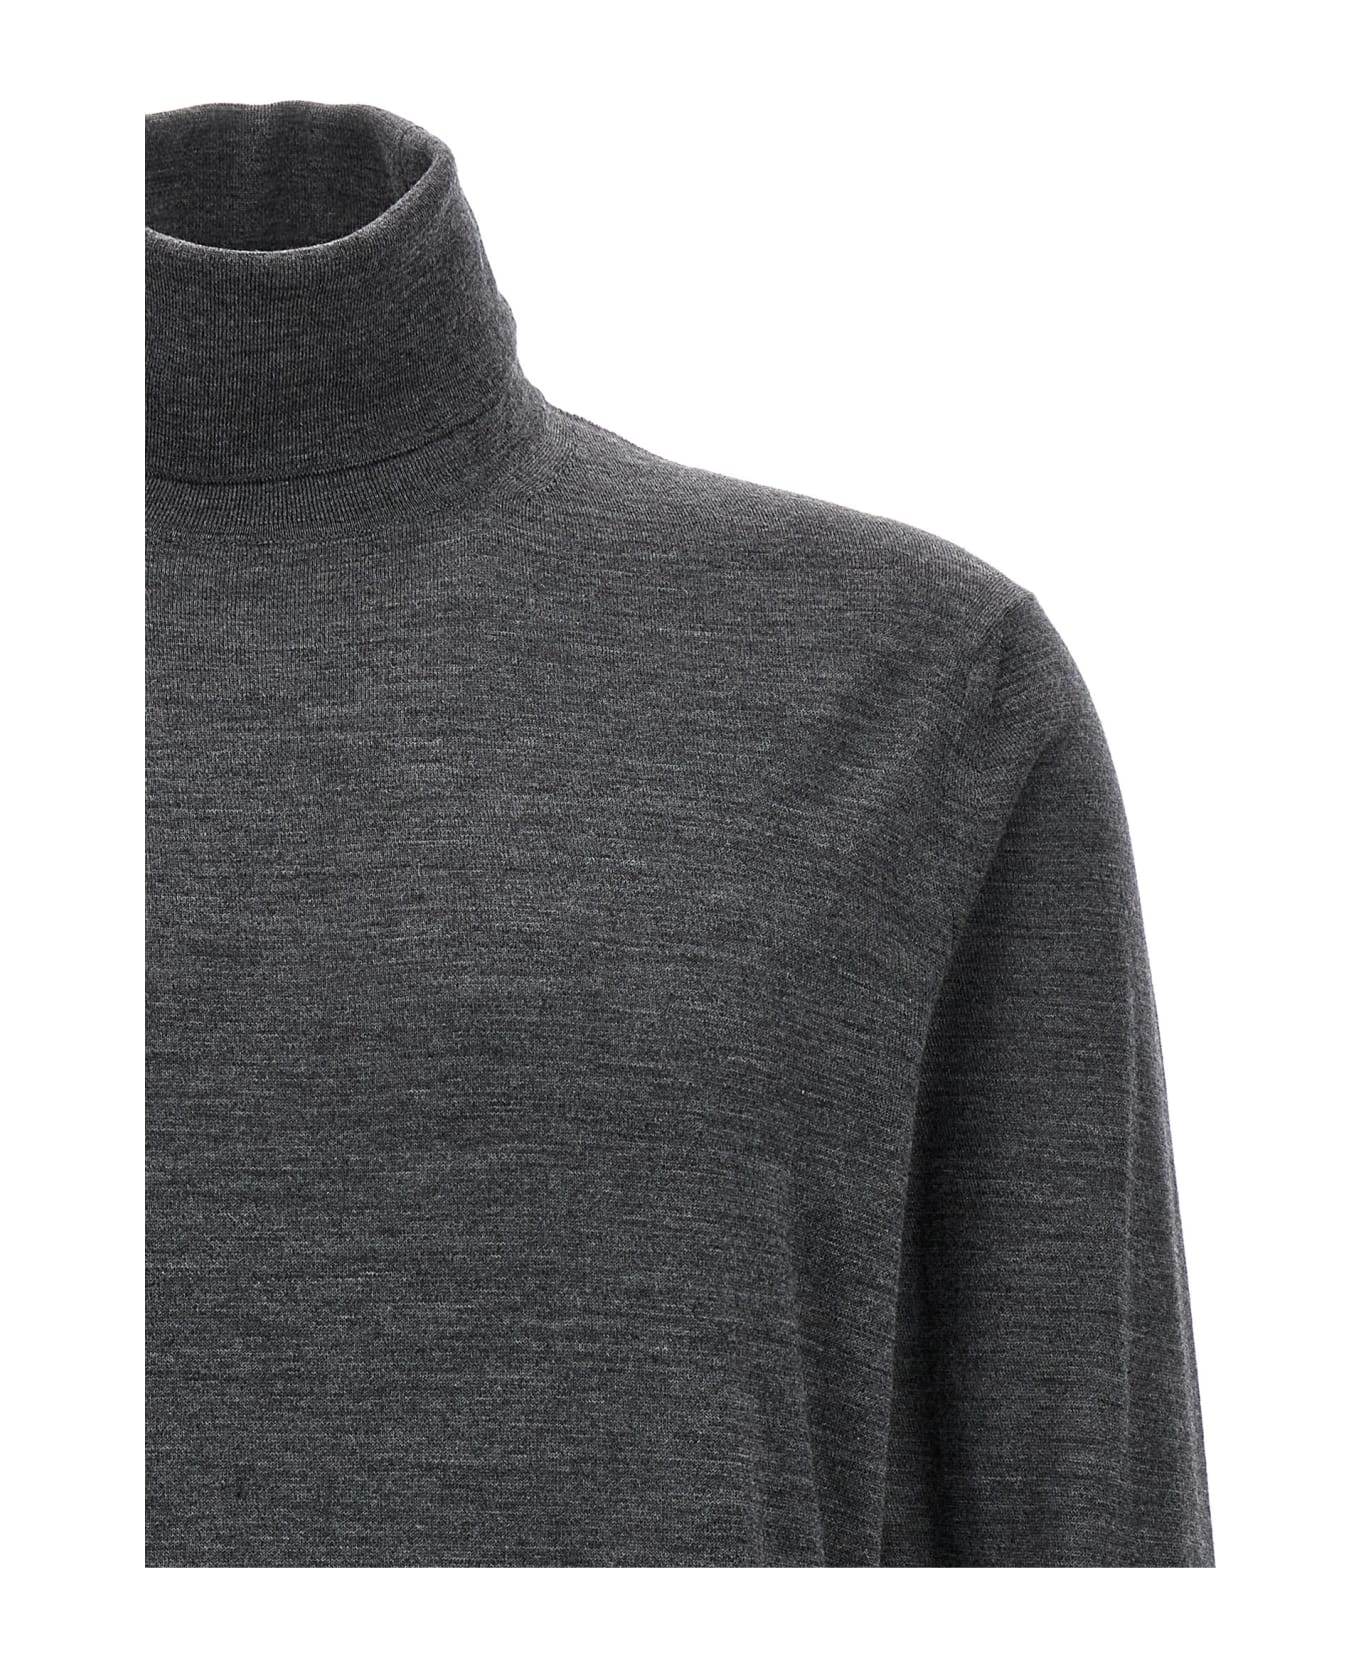 Tom Ford High Neck Sweater - Gray